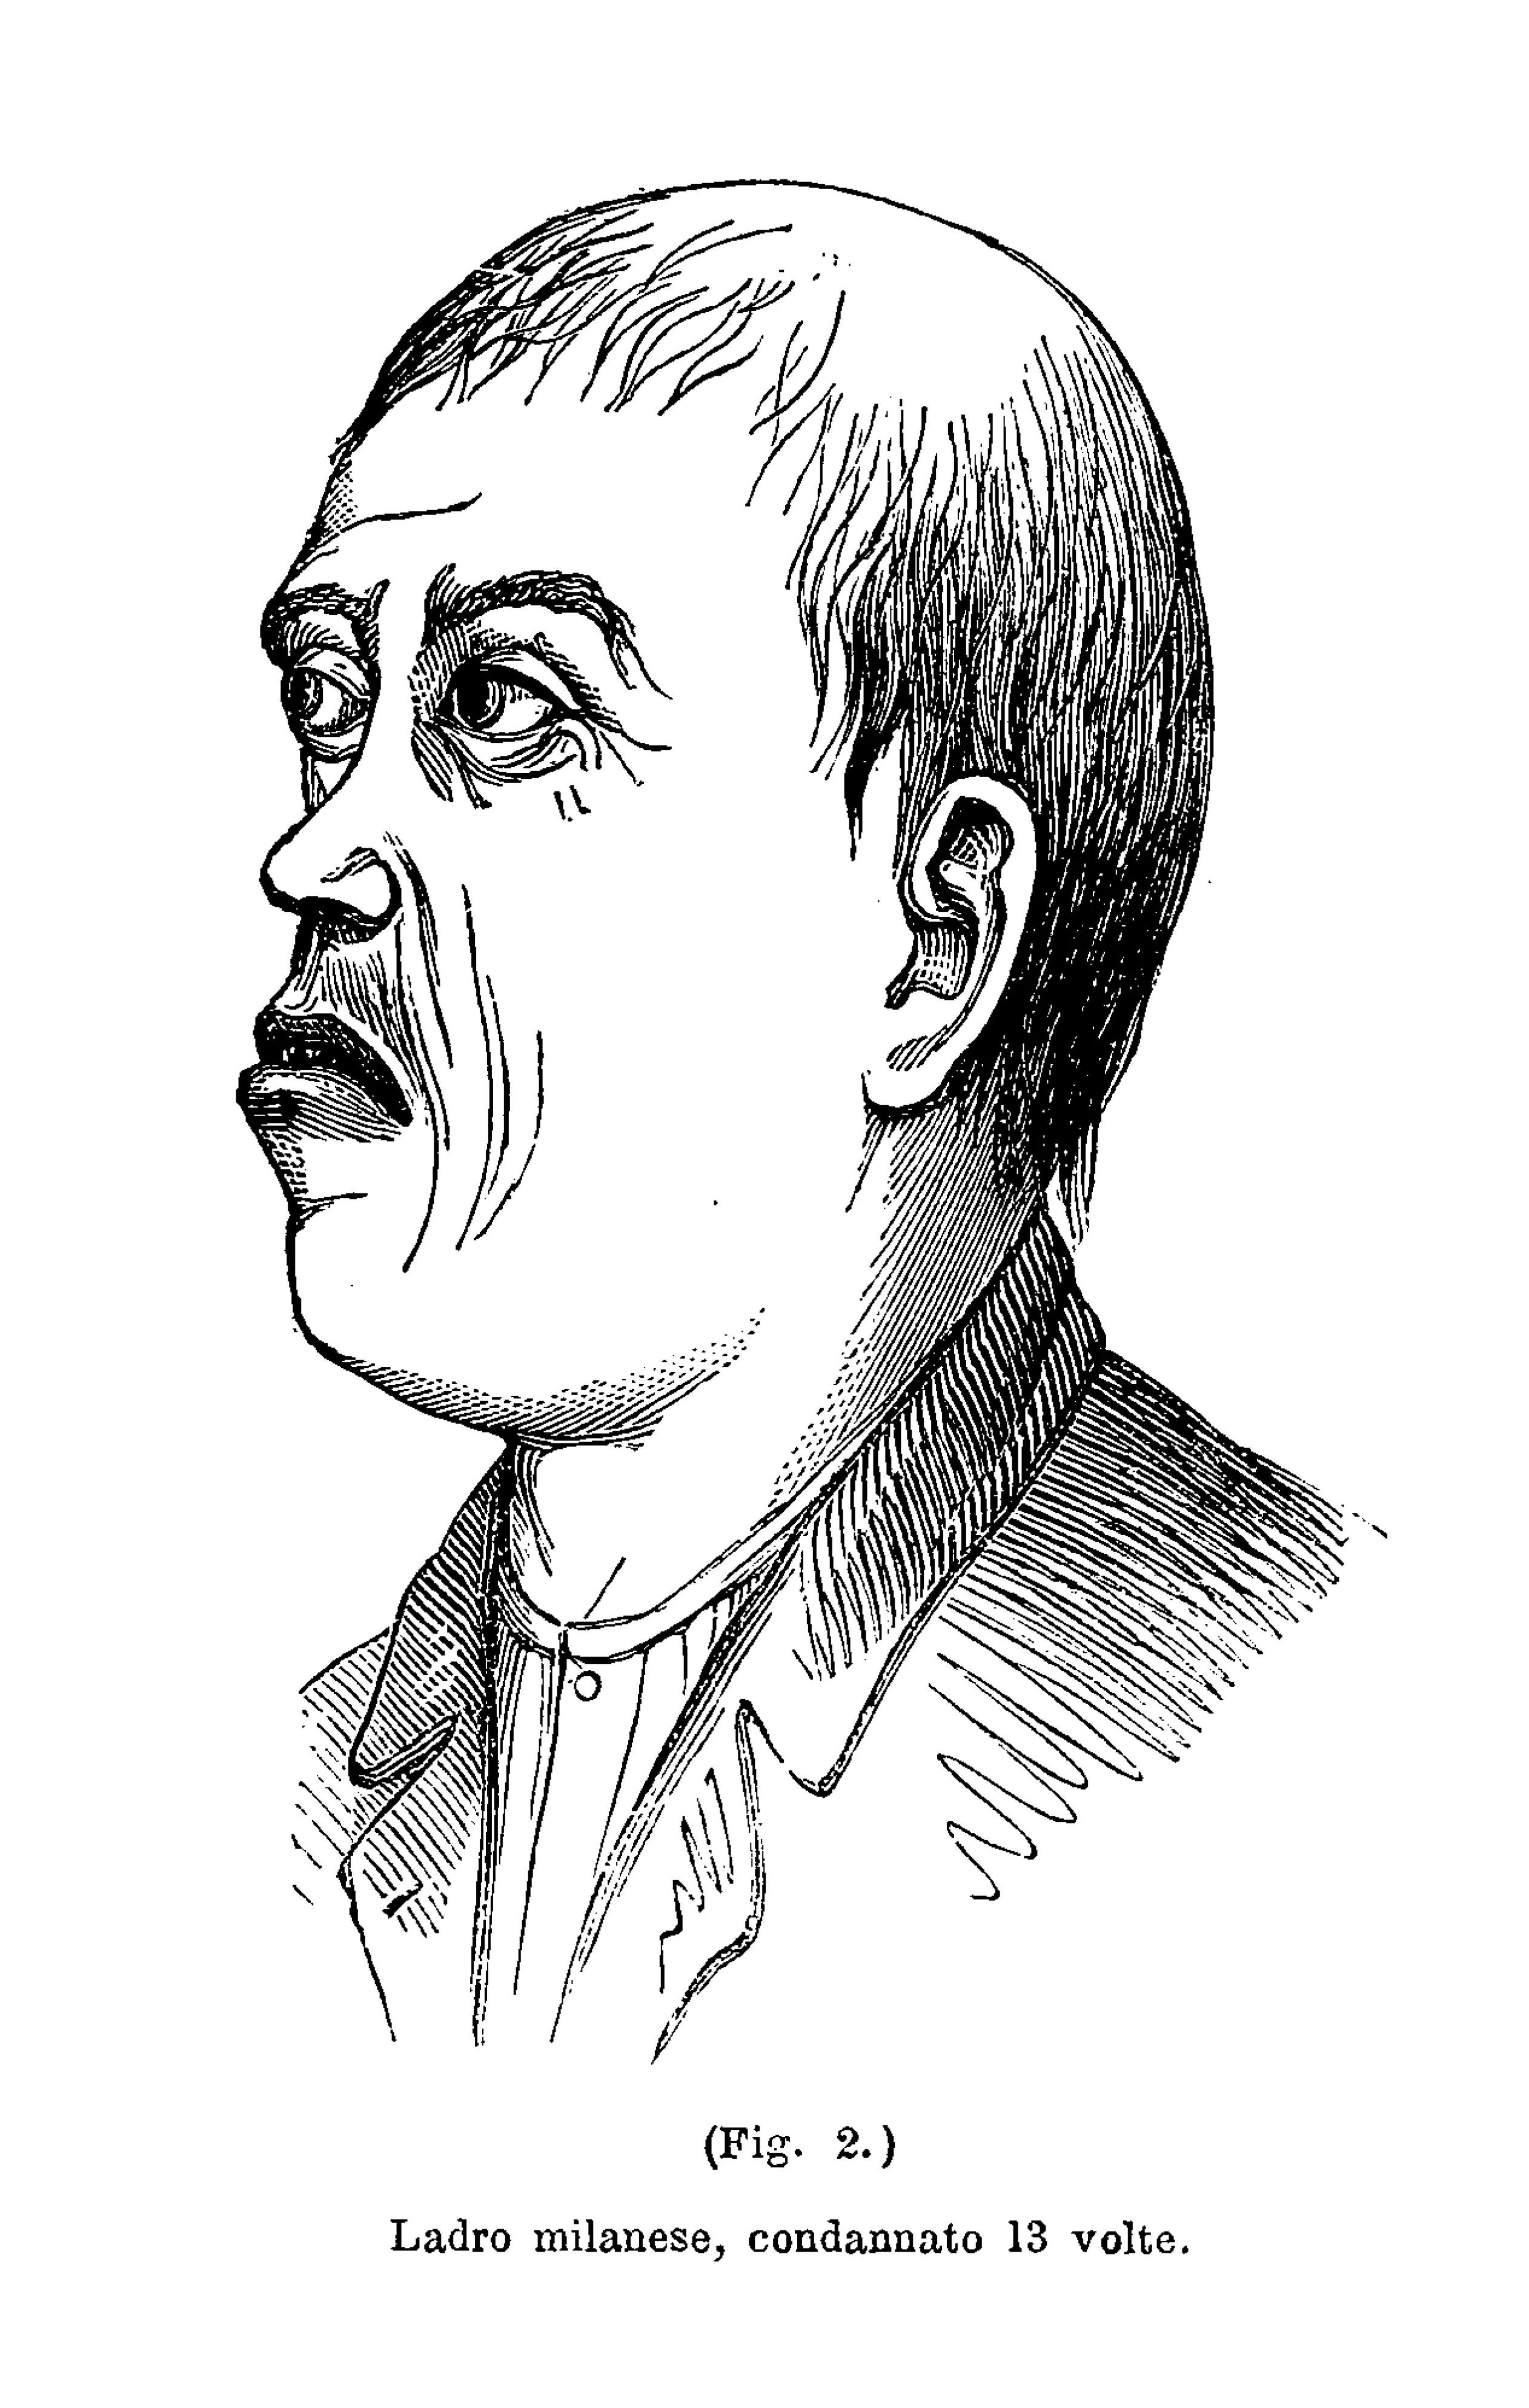 Drawing of a man with a rounded head, deep-set eyes, and a determined expression.